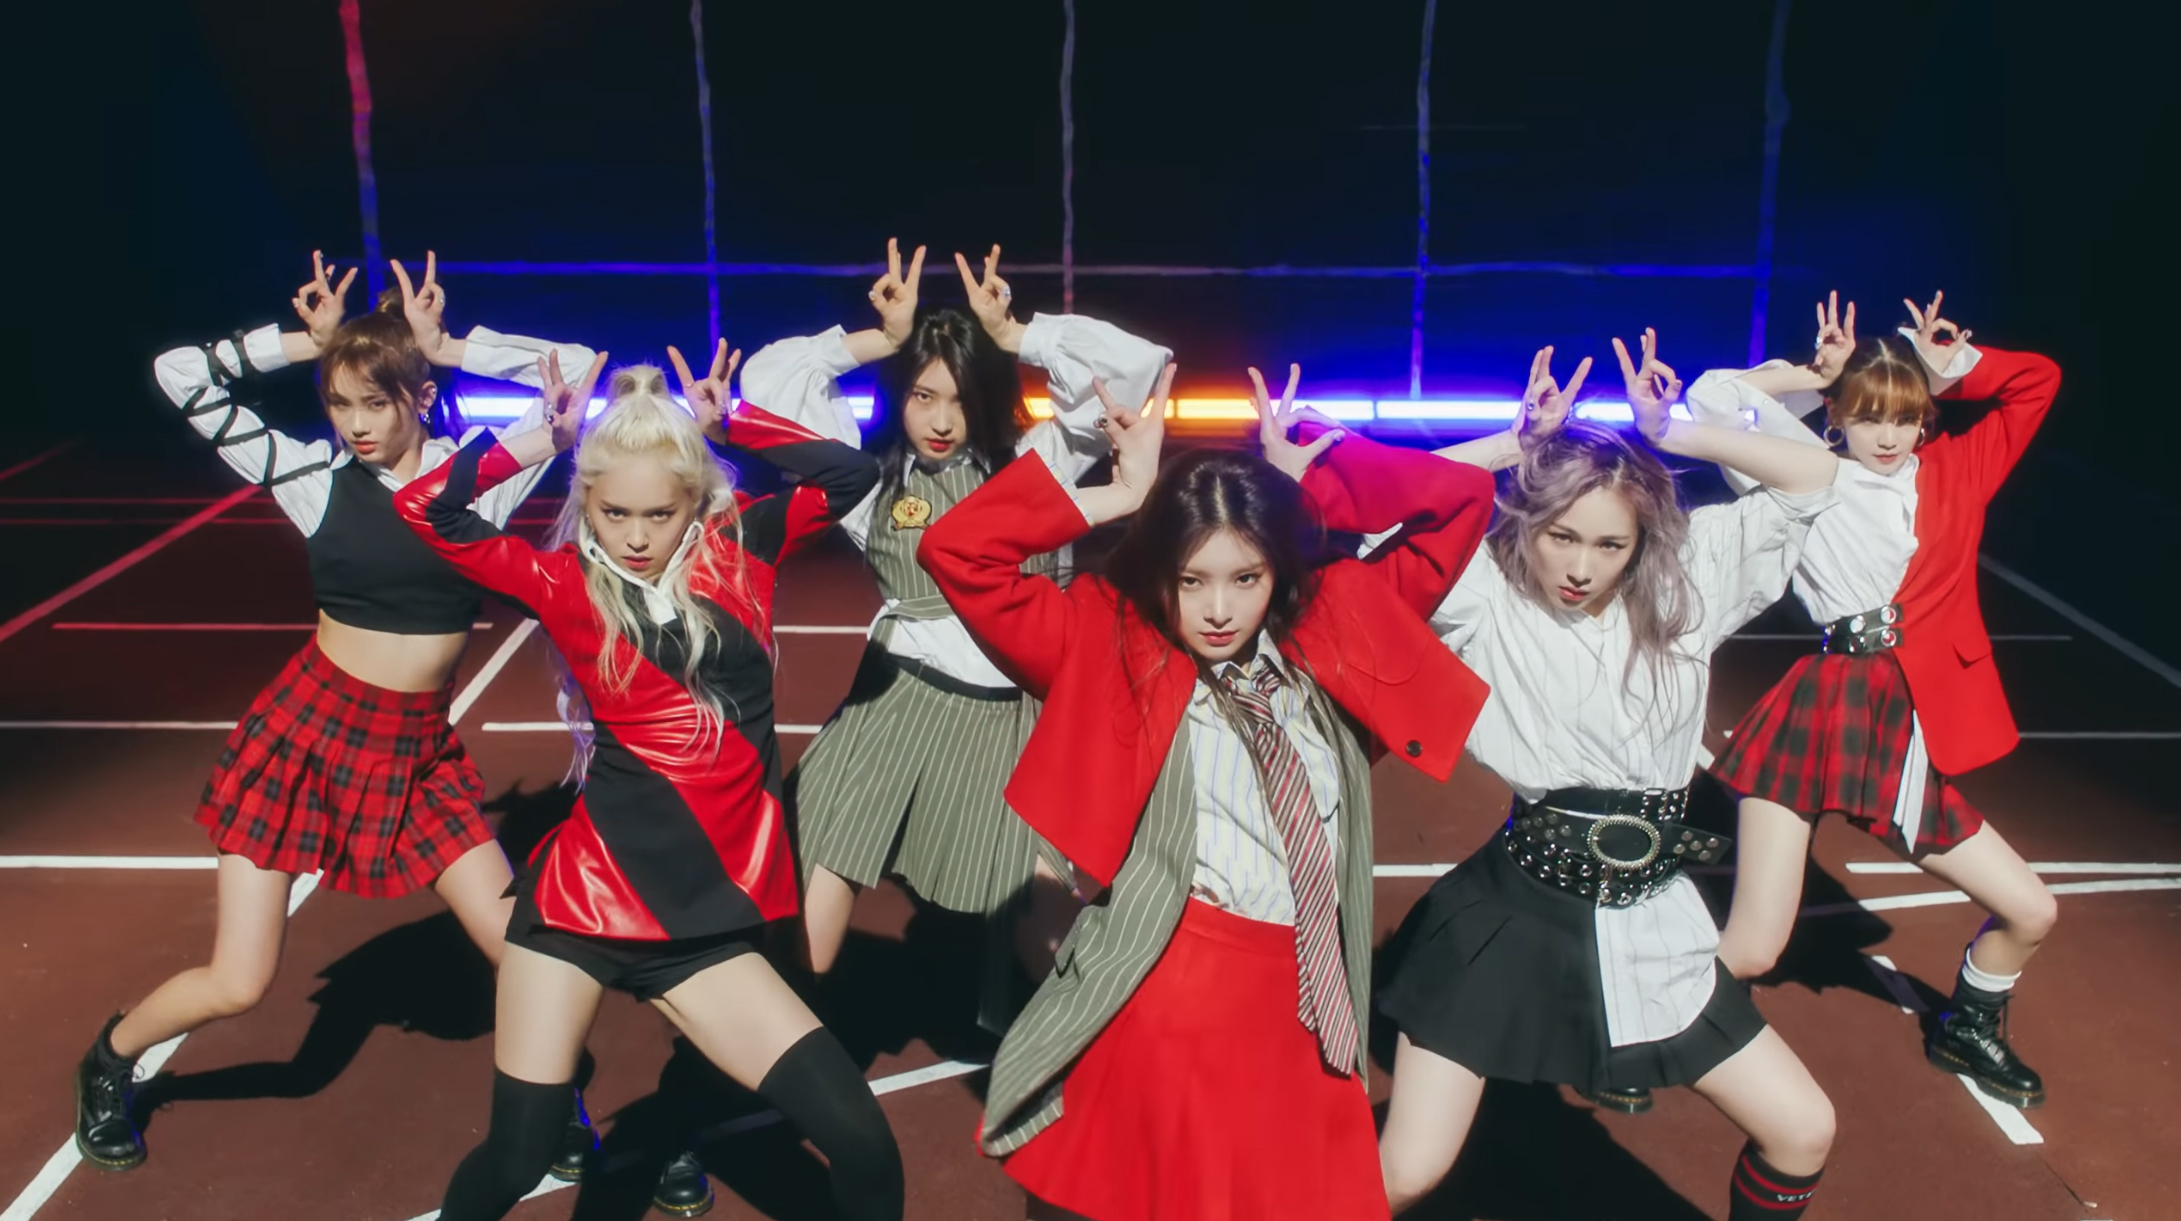 When Did Everglow Debut?